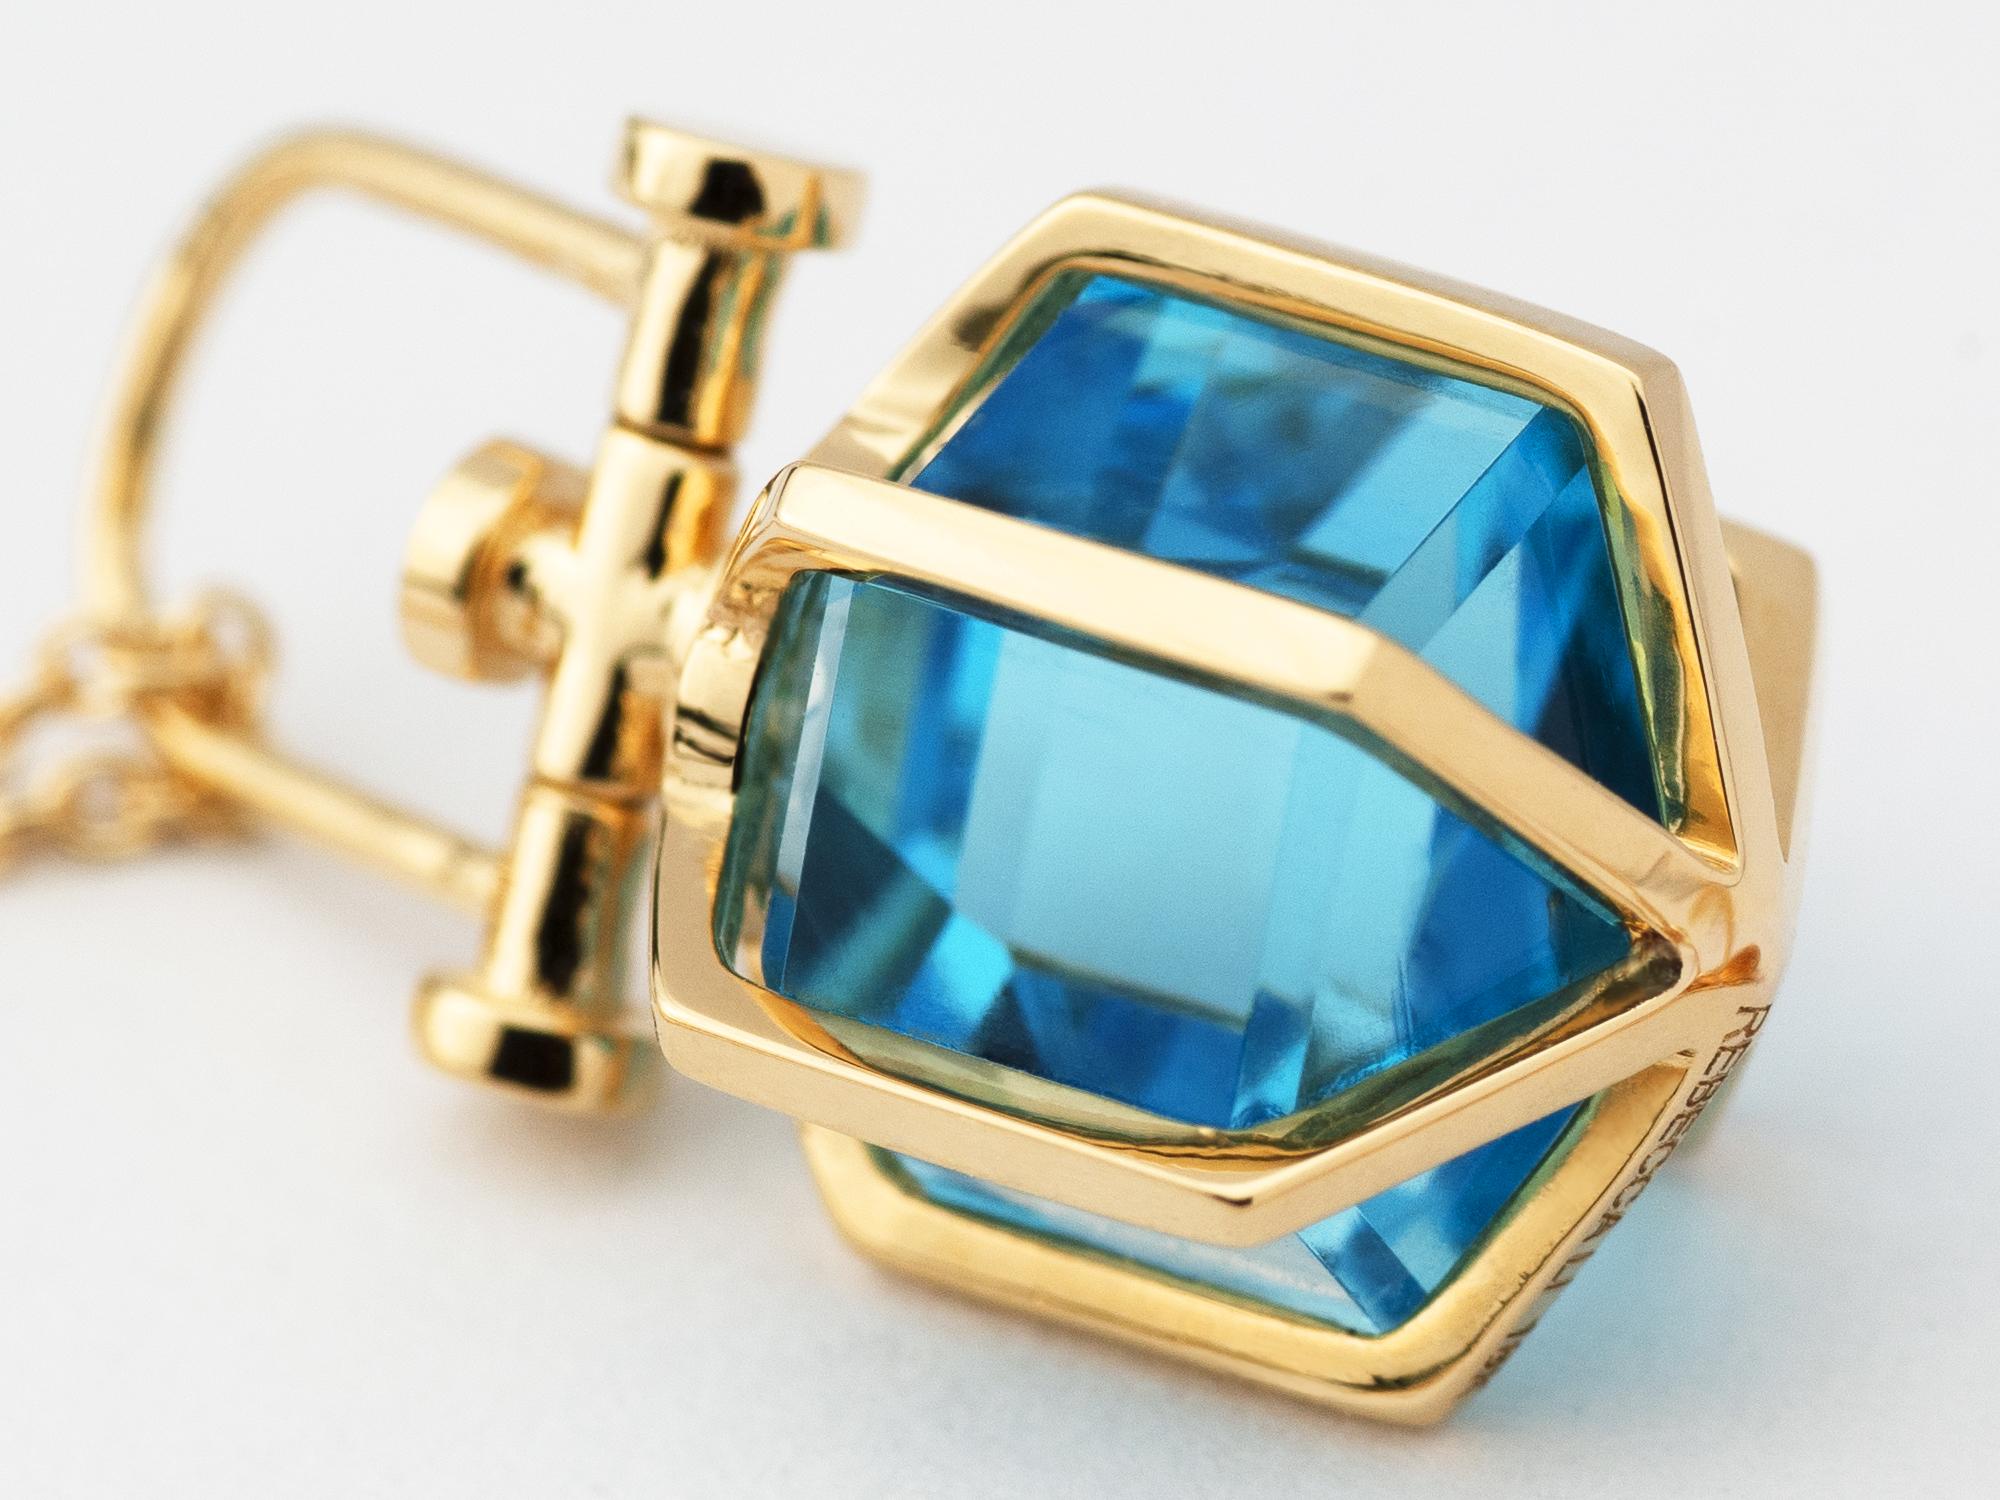 Rebecca Li designs mindfulness.
This sacred hexagon inspired necklace  signifies our intuition.
Blue Topaz means Healing, Health and Positivity.

Talisman Pendant :
18K Yellow Gold
Swiss Blue Topaz
Pendant Size: 10 mm W * 10 mm D * 18 mm H
Gemstone